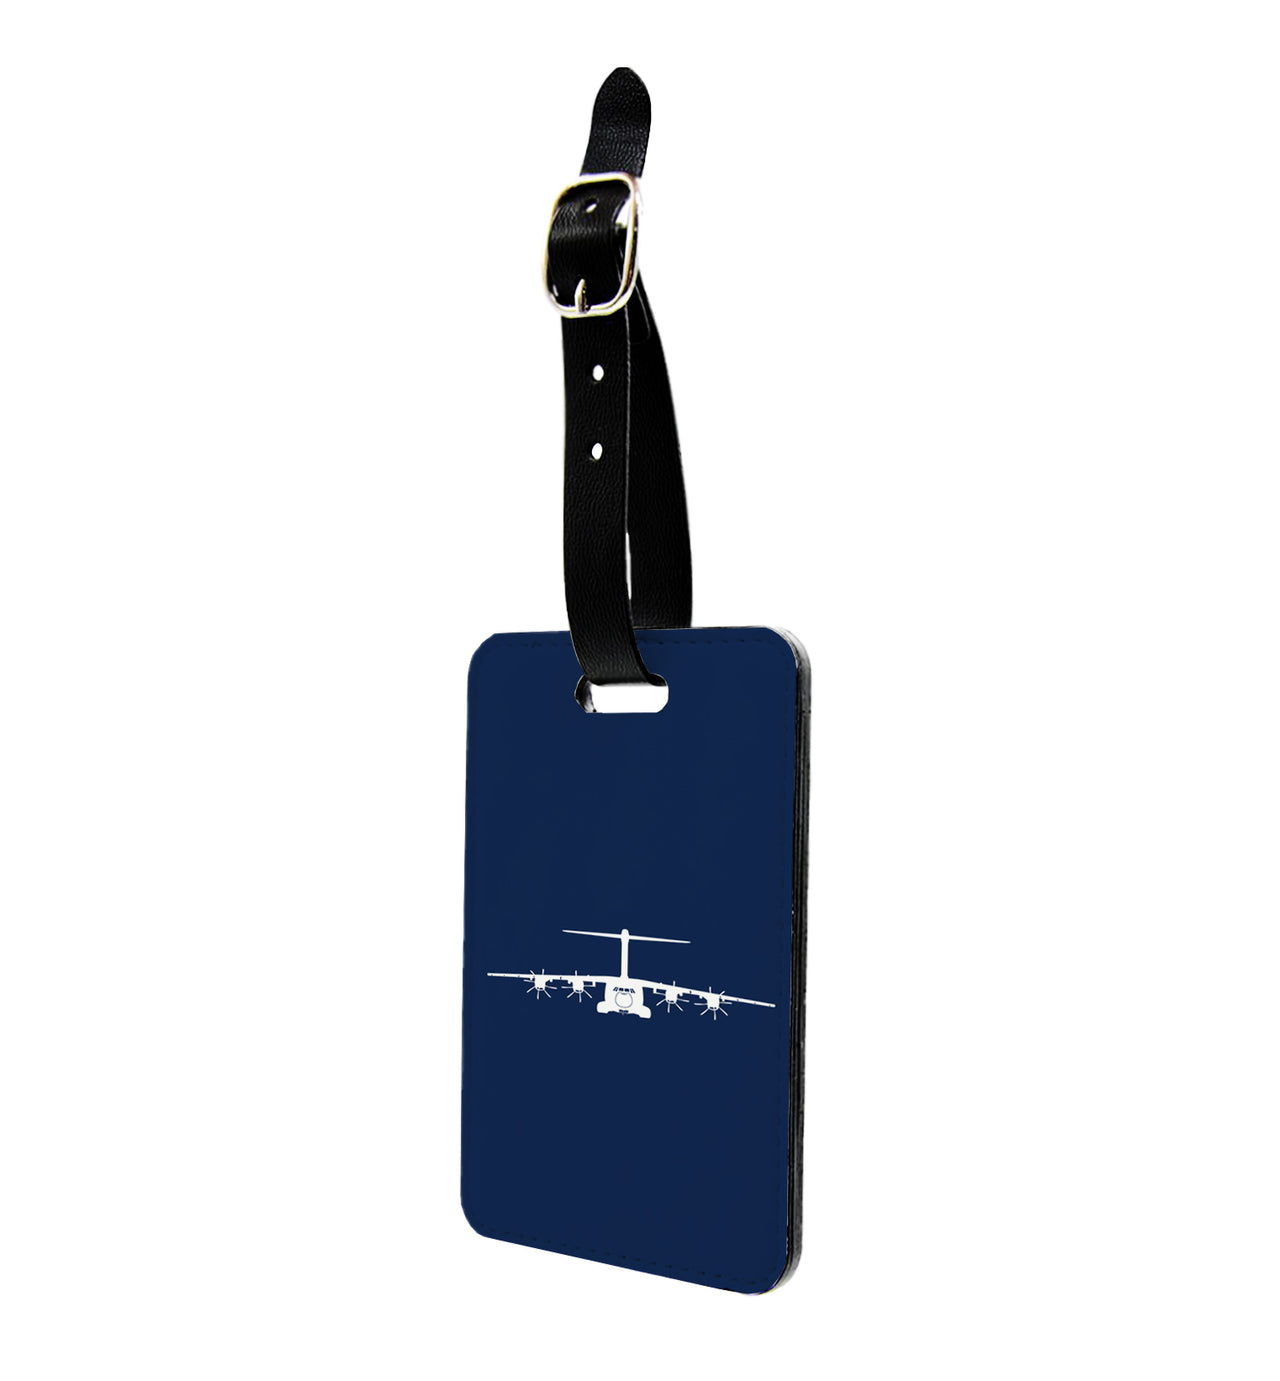 Airbus A400M Silhouette Designed Luggage Tag